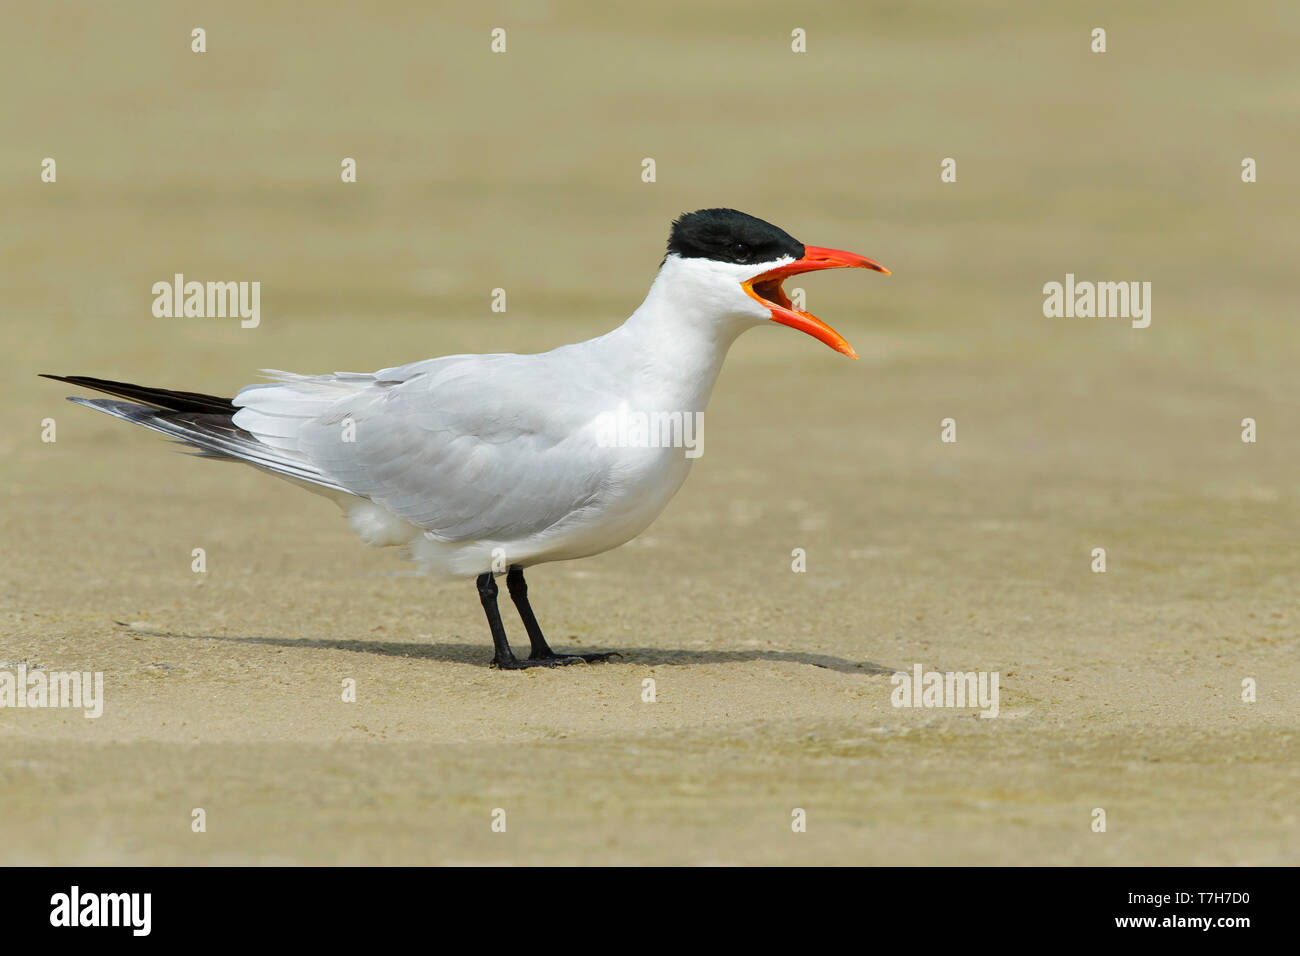 Adult Caspian Tern (Hydroprogne caspia) calling on a beach in full breeding plumage in Galveston County, Texas, USA, during spring. Stock Photo